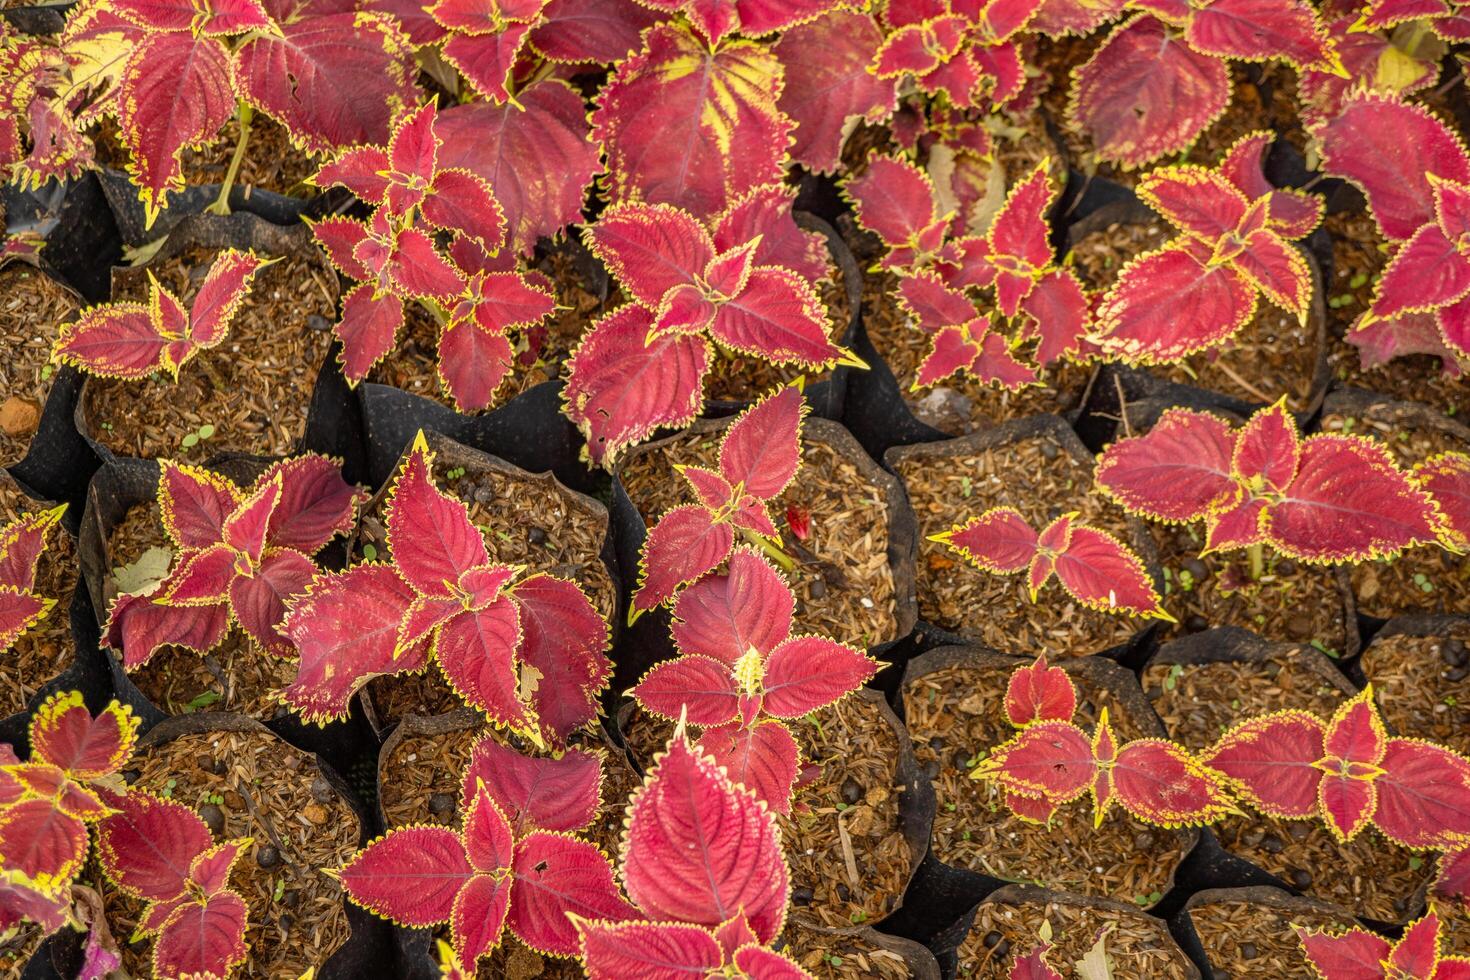 Lot of red leaf Miana, Iler Coleus scutellarioides on park as decorative plant. The photo is suitable to use for botanical background, nature poster and flora education content media.